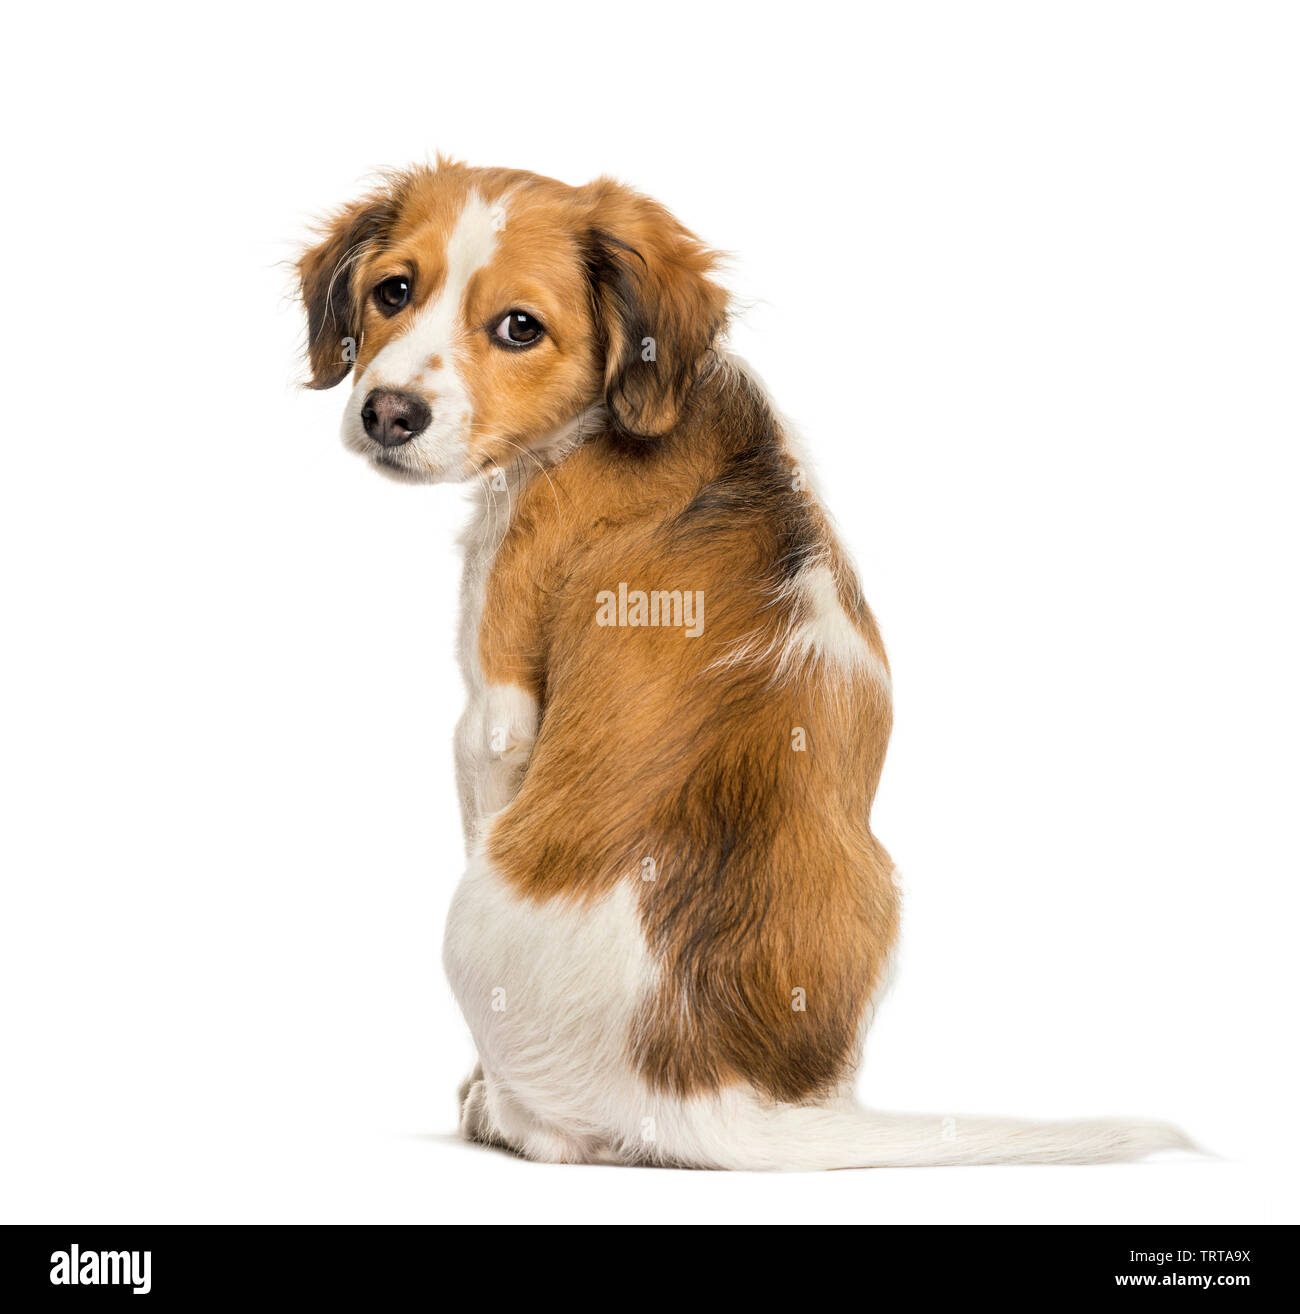 Kooikerhondje, 3 months old, sitting in front of white background Stock Photo